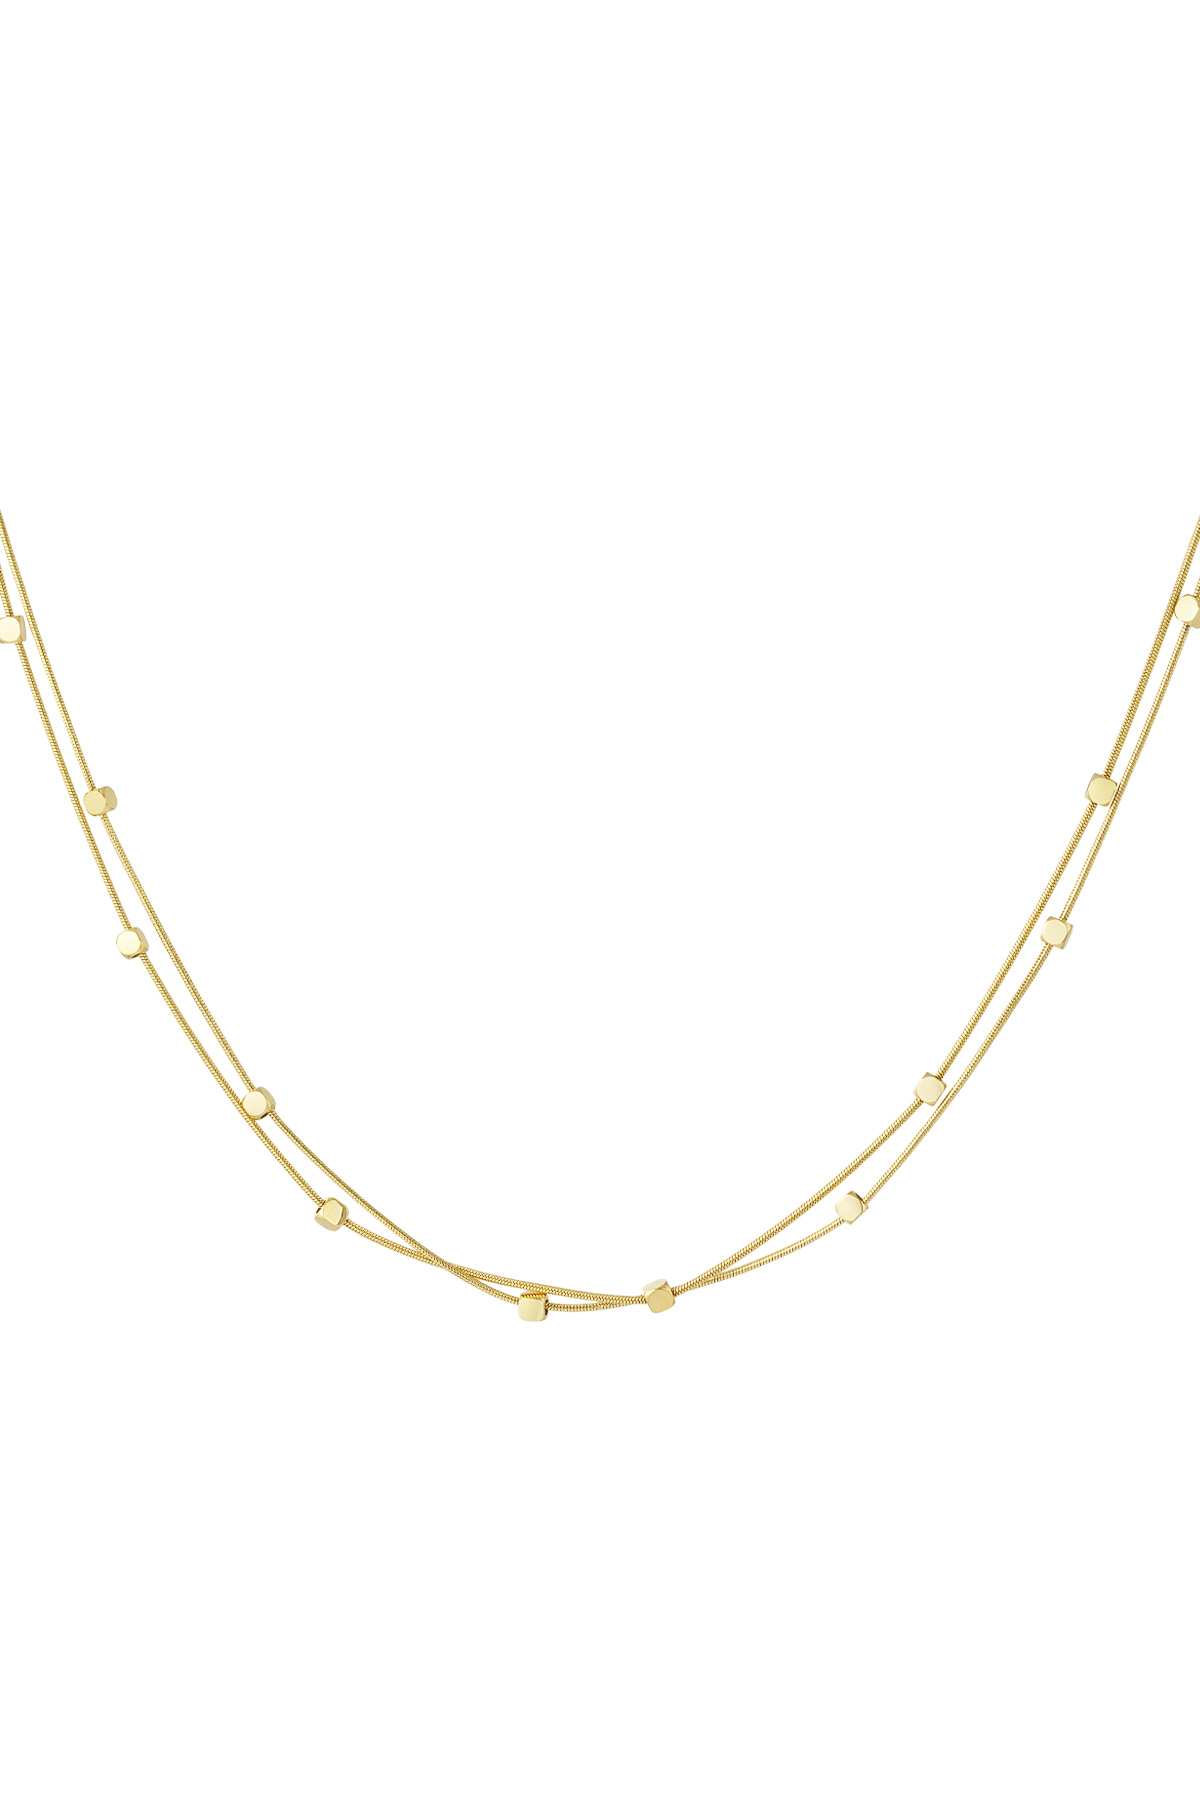 Double chain with coins - gold h5 